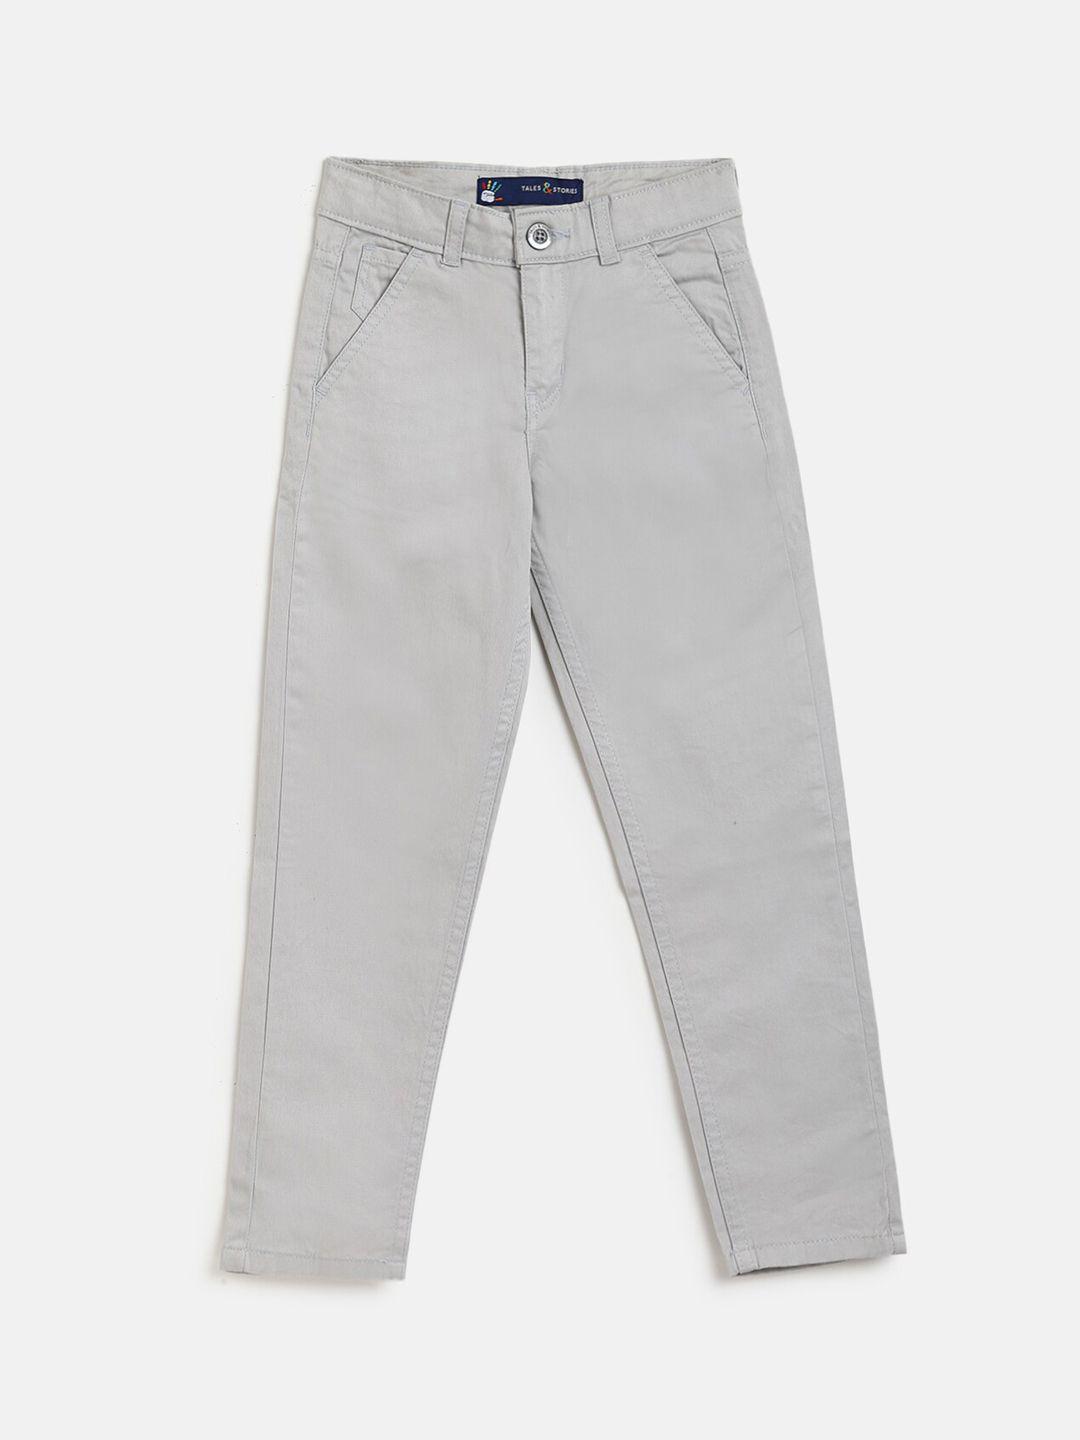 tales-&-stories-boys-grey-slim-fit-chinos-trousers